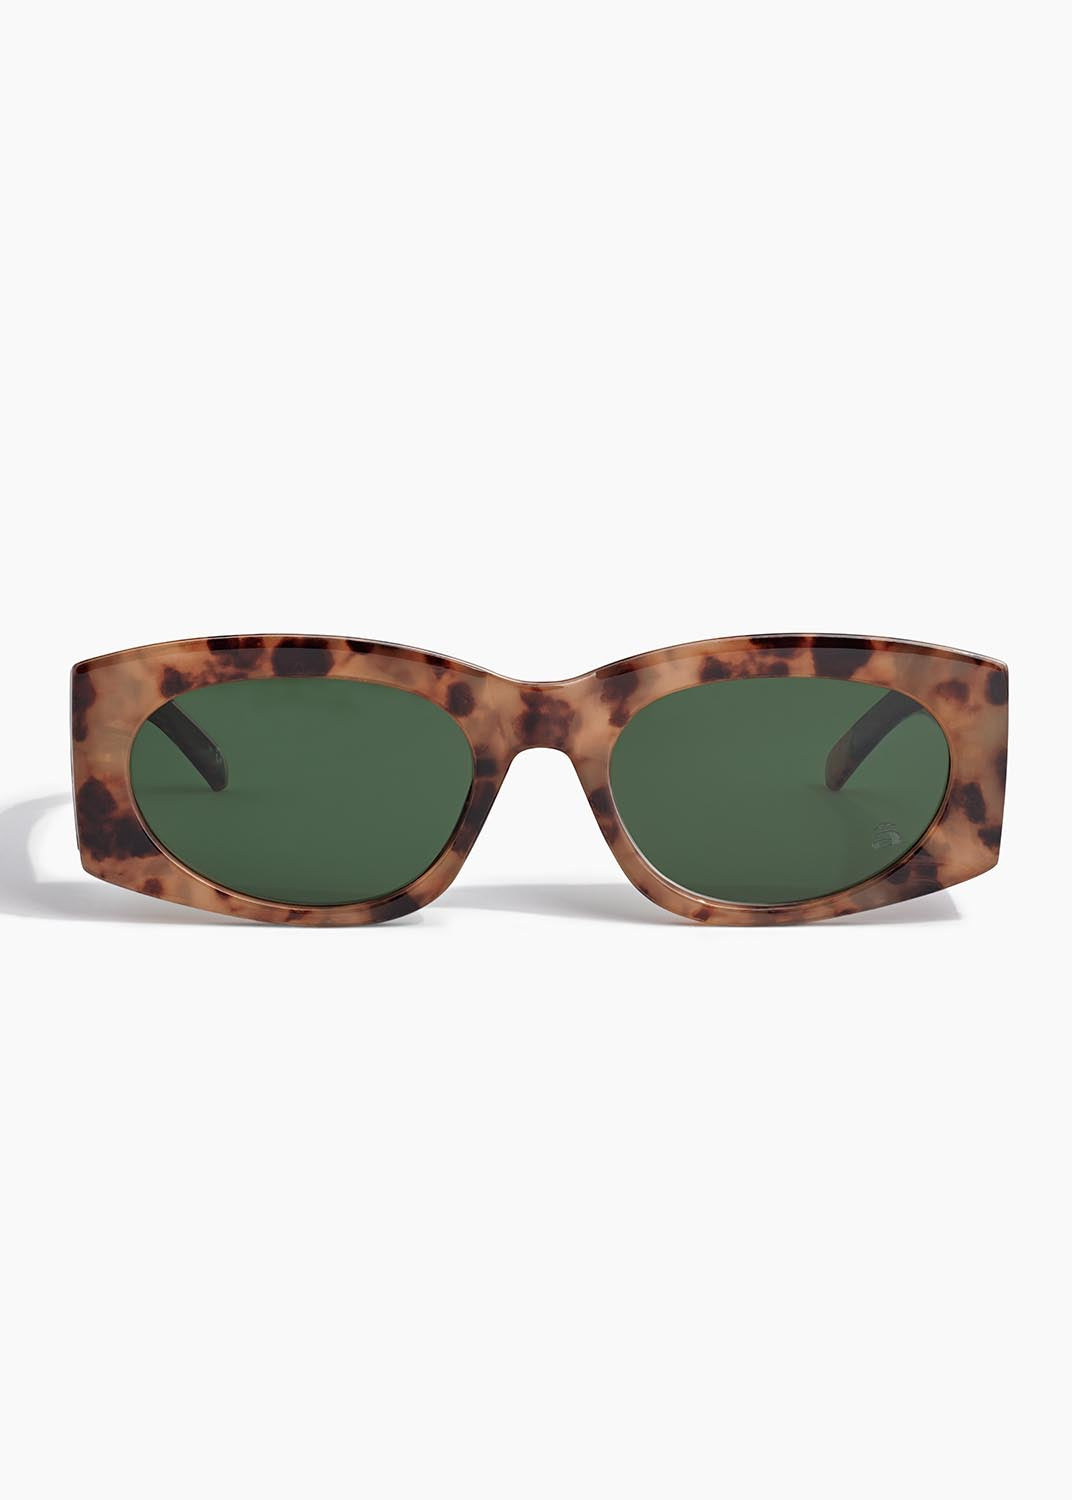 Szade RECYCLED SUNGLASSES Cave ; Coquina / Moss Polarised in Coquina / Moss Polarised